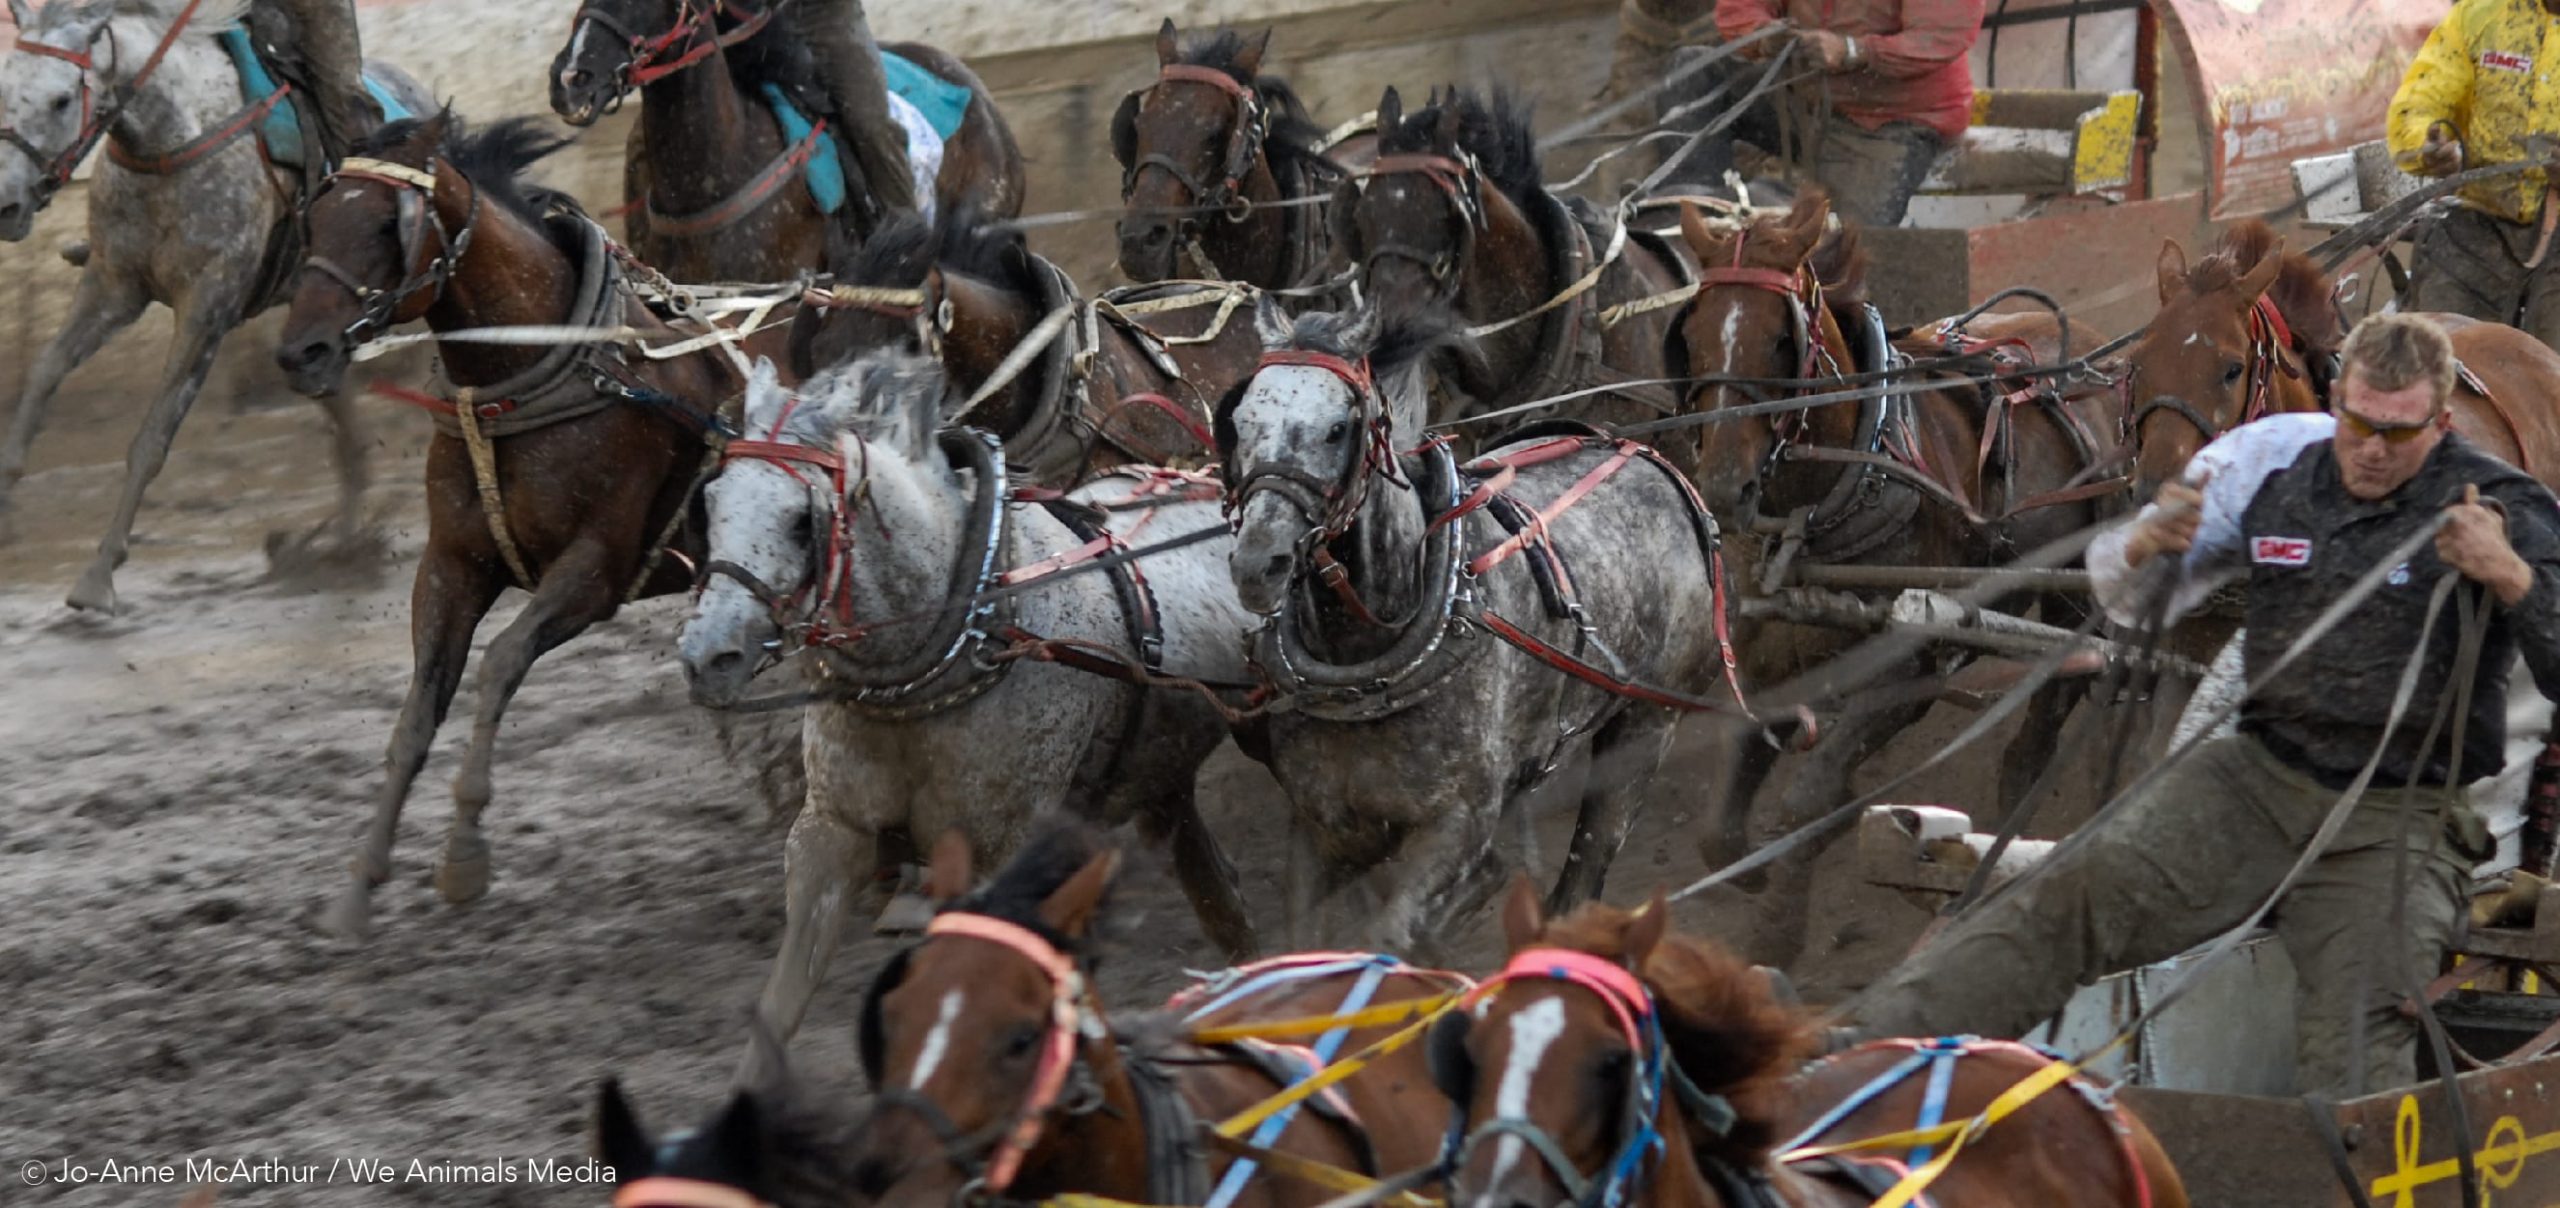 Animal Justice Calls for Charges After Horse Killed in Stampede Chuckwagon Race